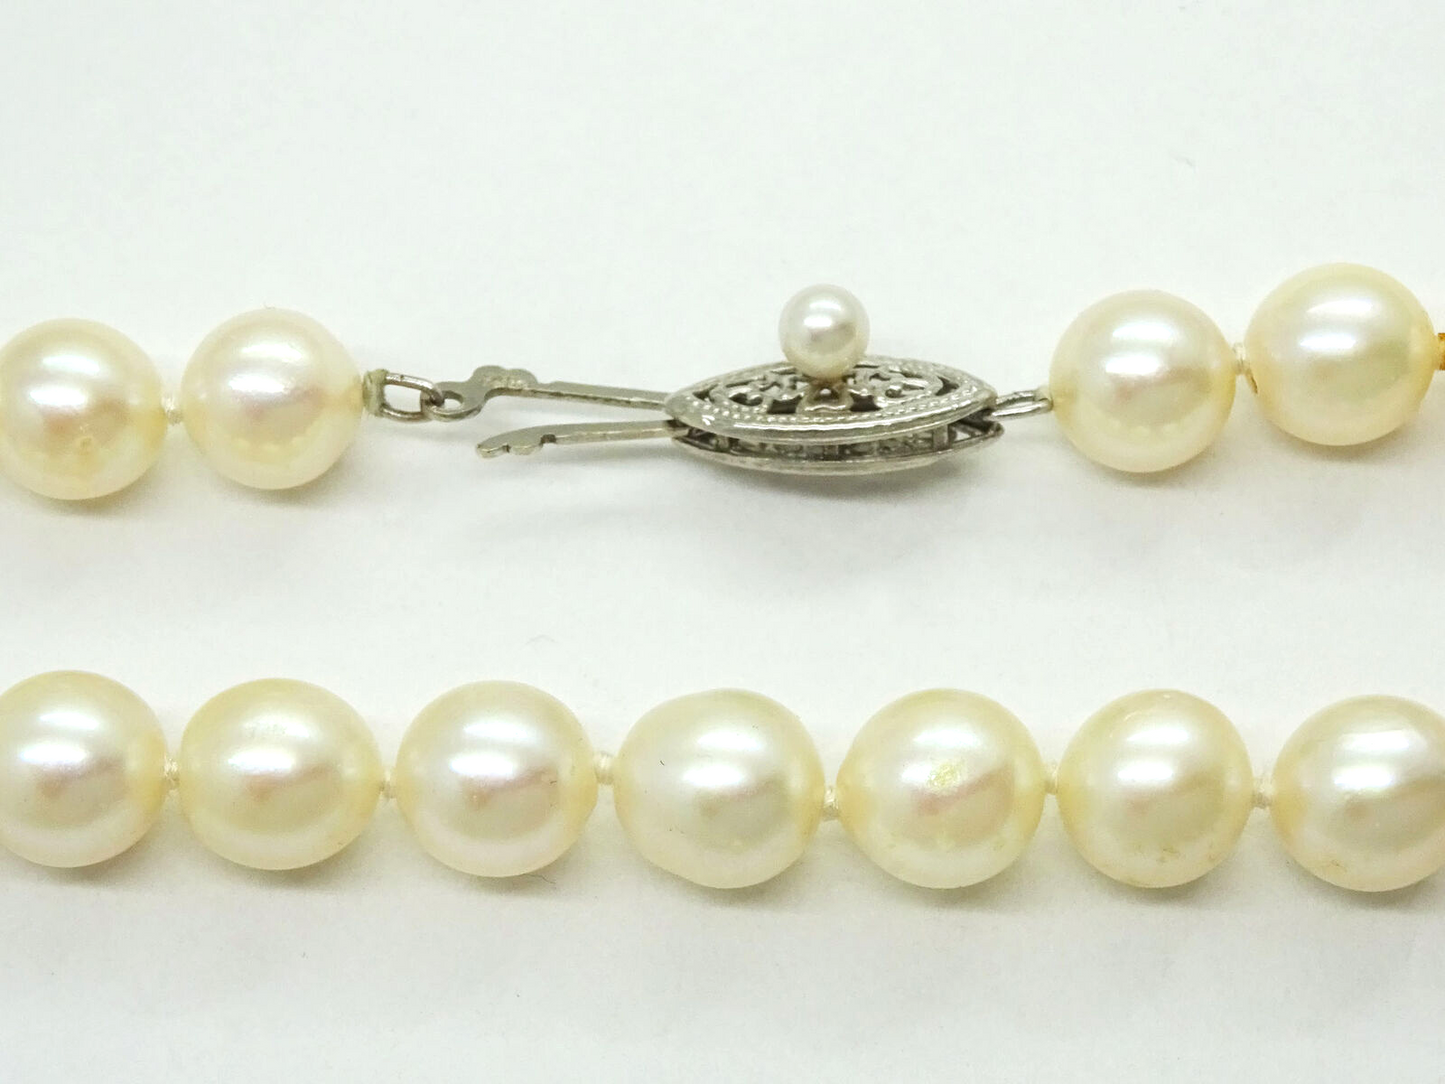 Vintage Imperial Cultured Pearls 7mm Bead Choker Necklace 14k White Gold 15.5"